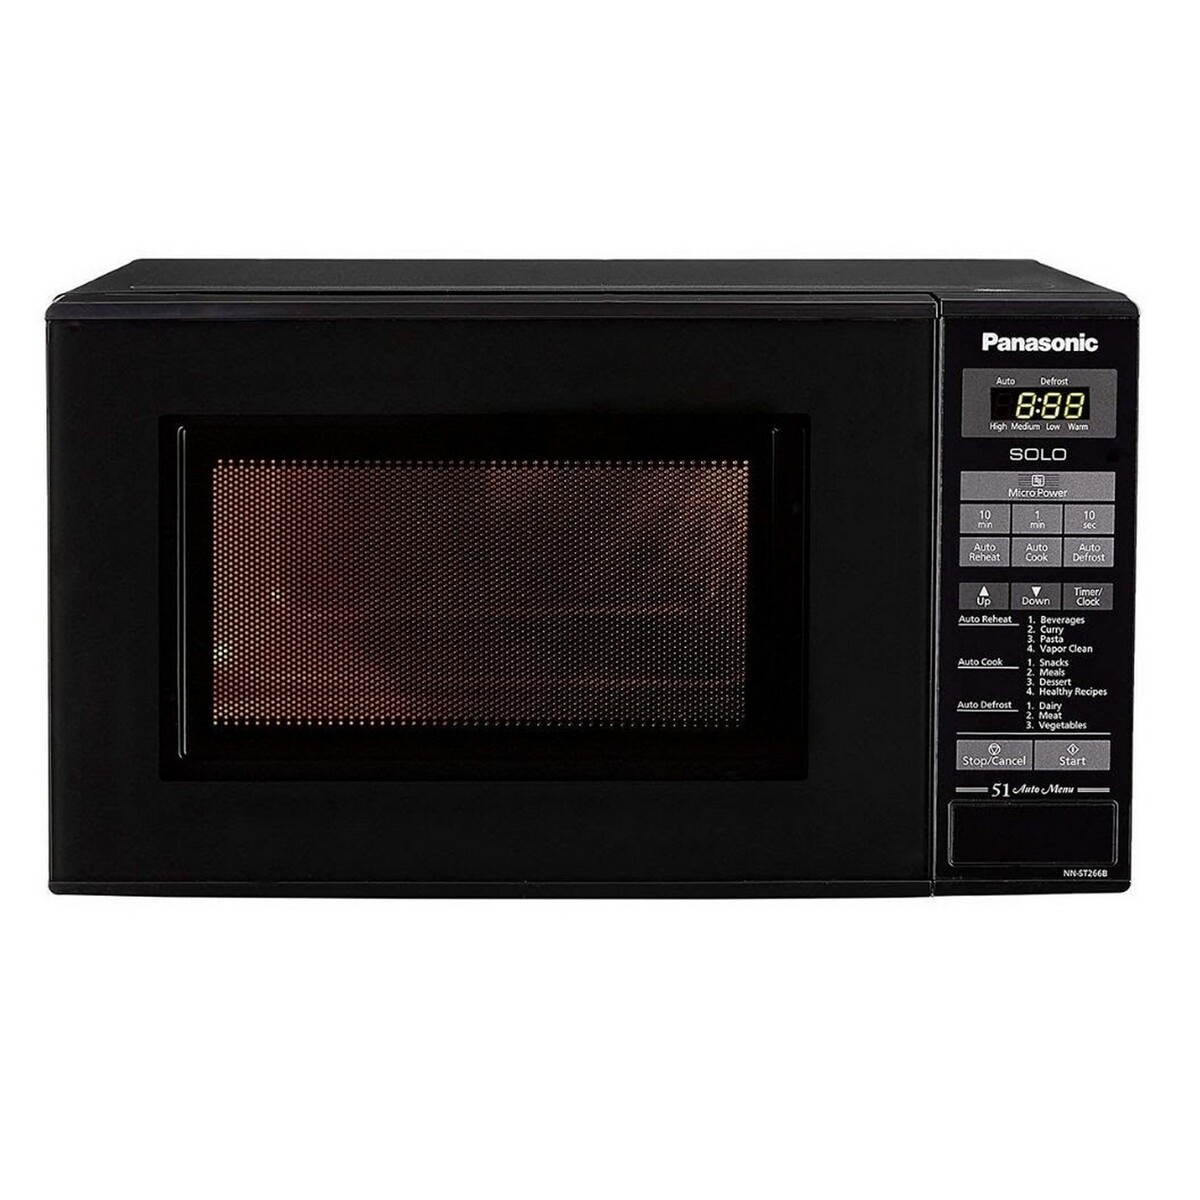 Panasonic Microwave Oven Solo -ST266BFDG 20Ltr